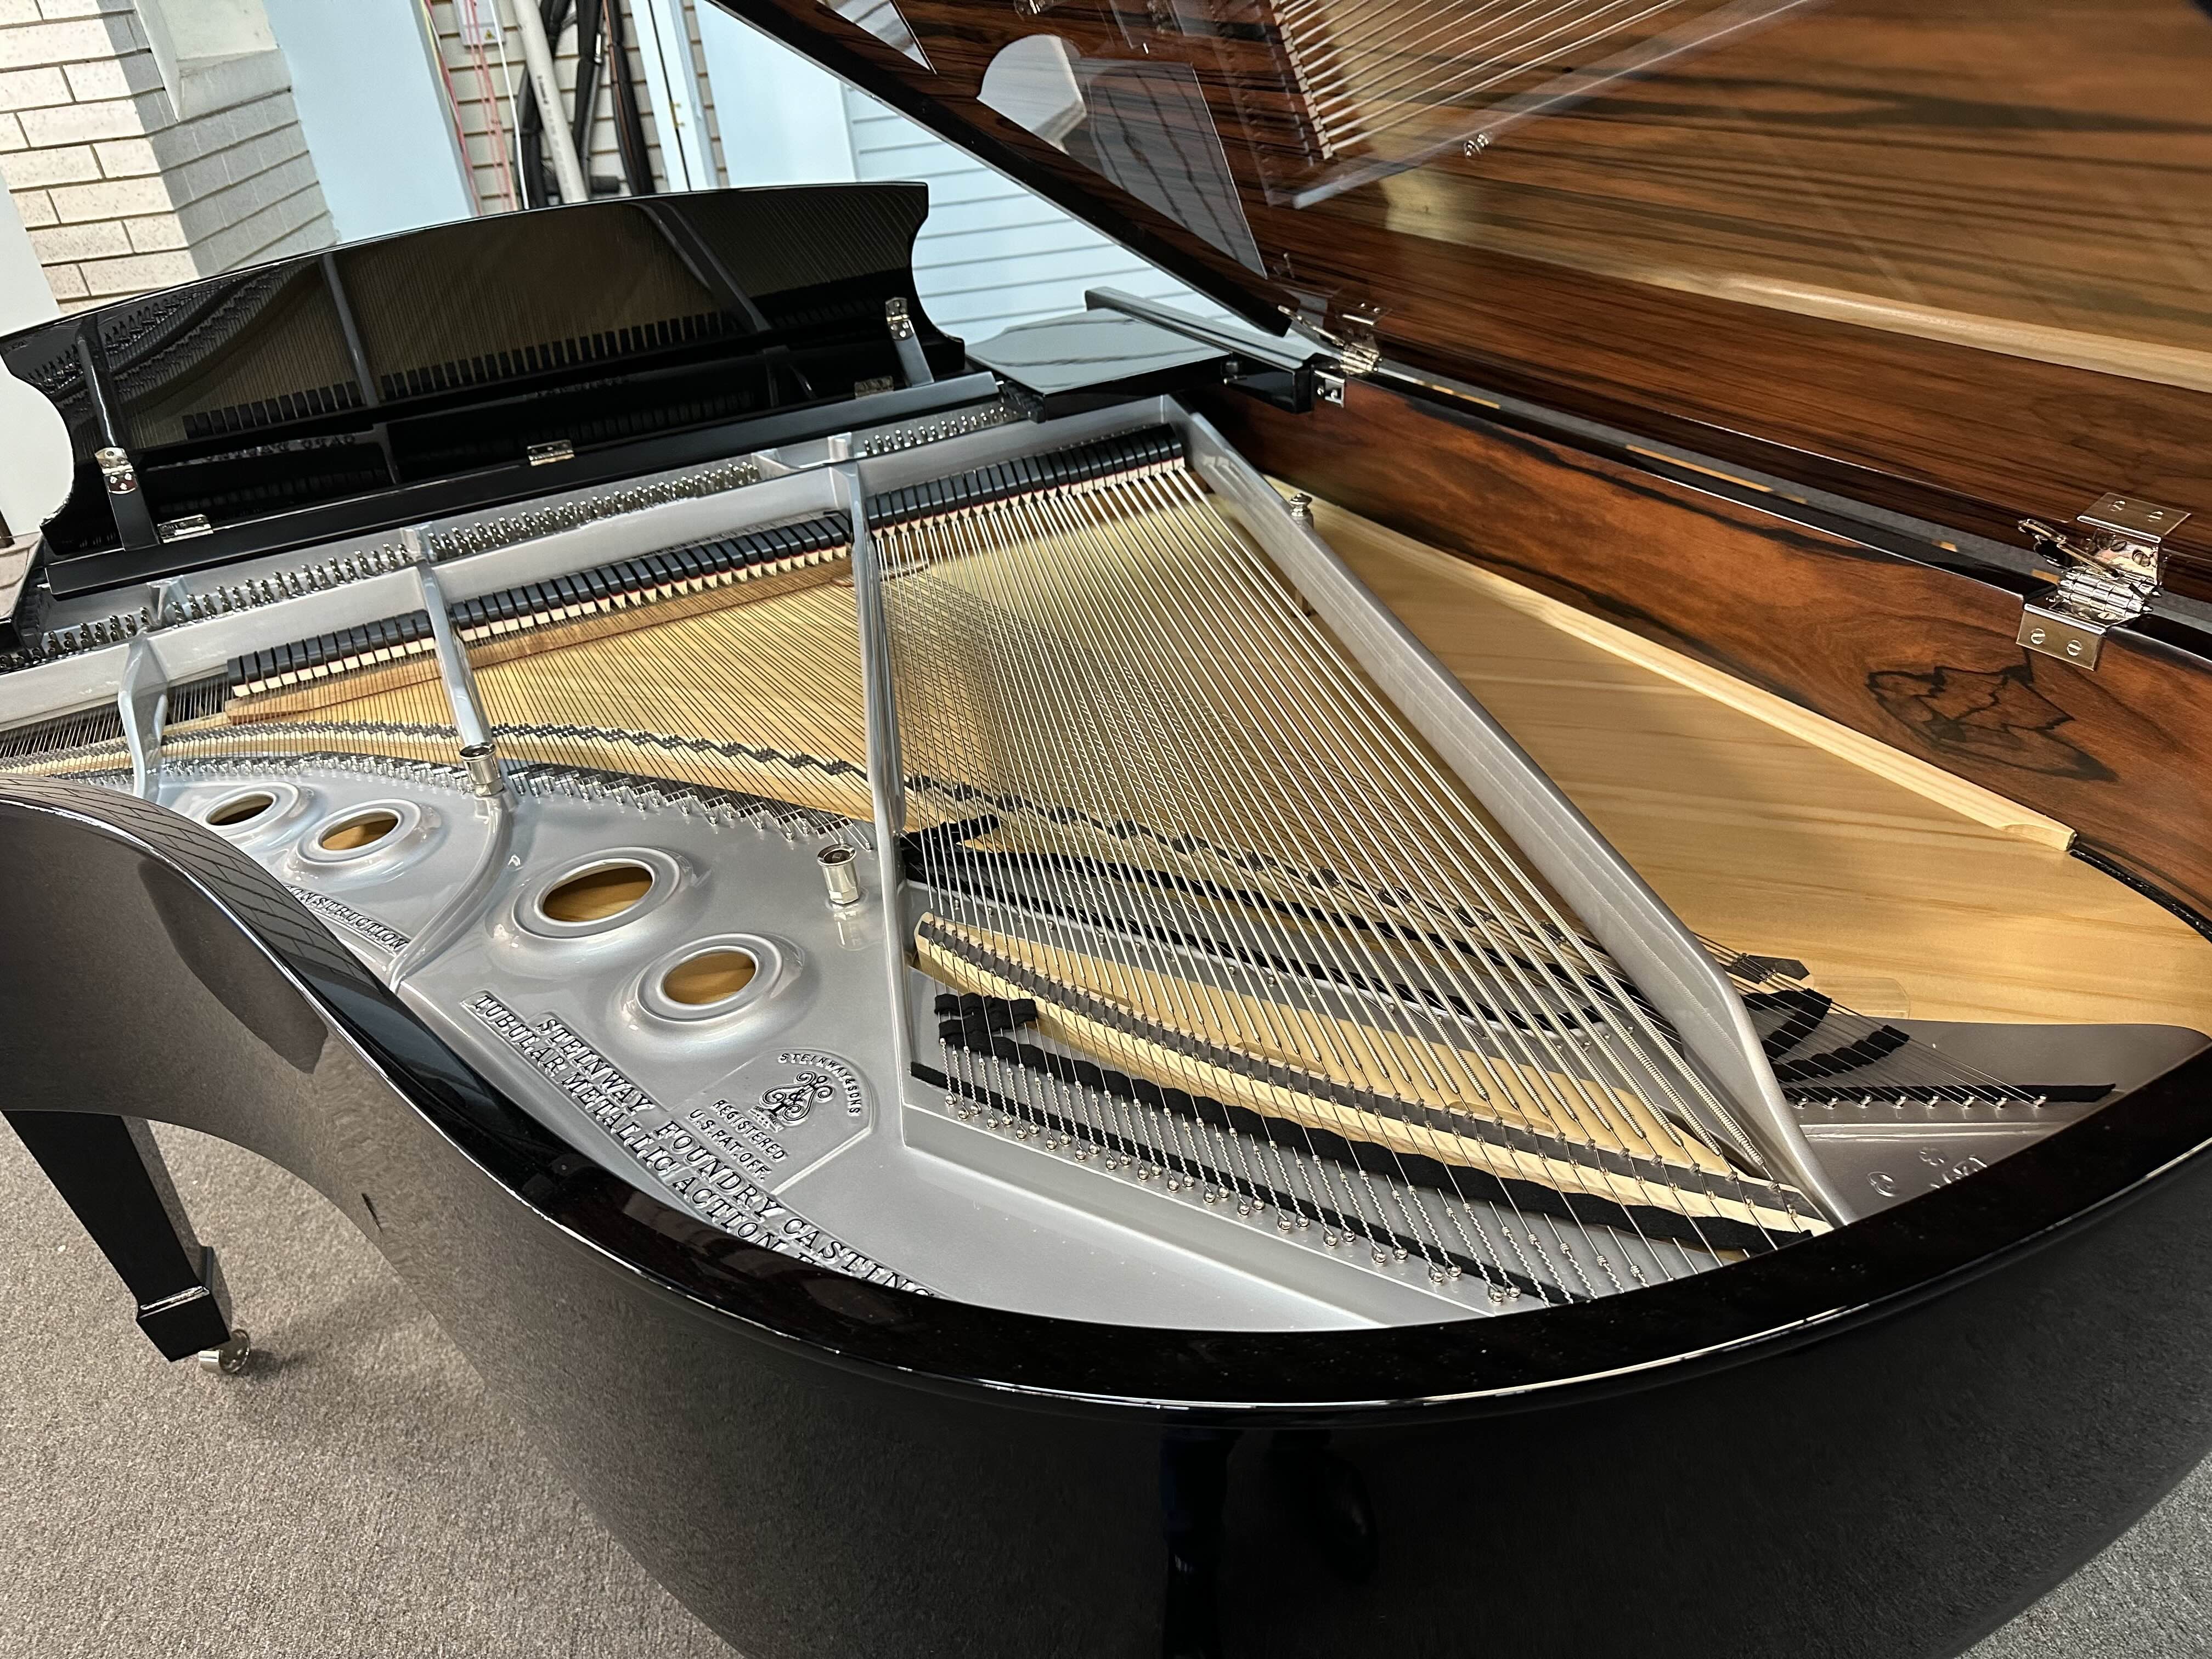 1931 Steinway Model L "Duet" 5'10" Grand Piano in Macassar and Polished Ebony